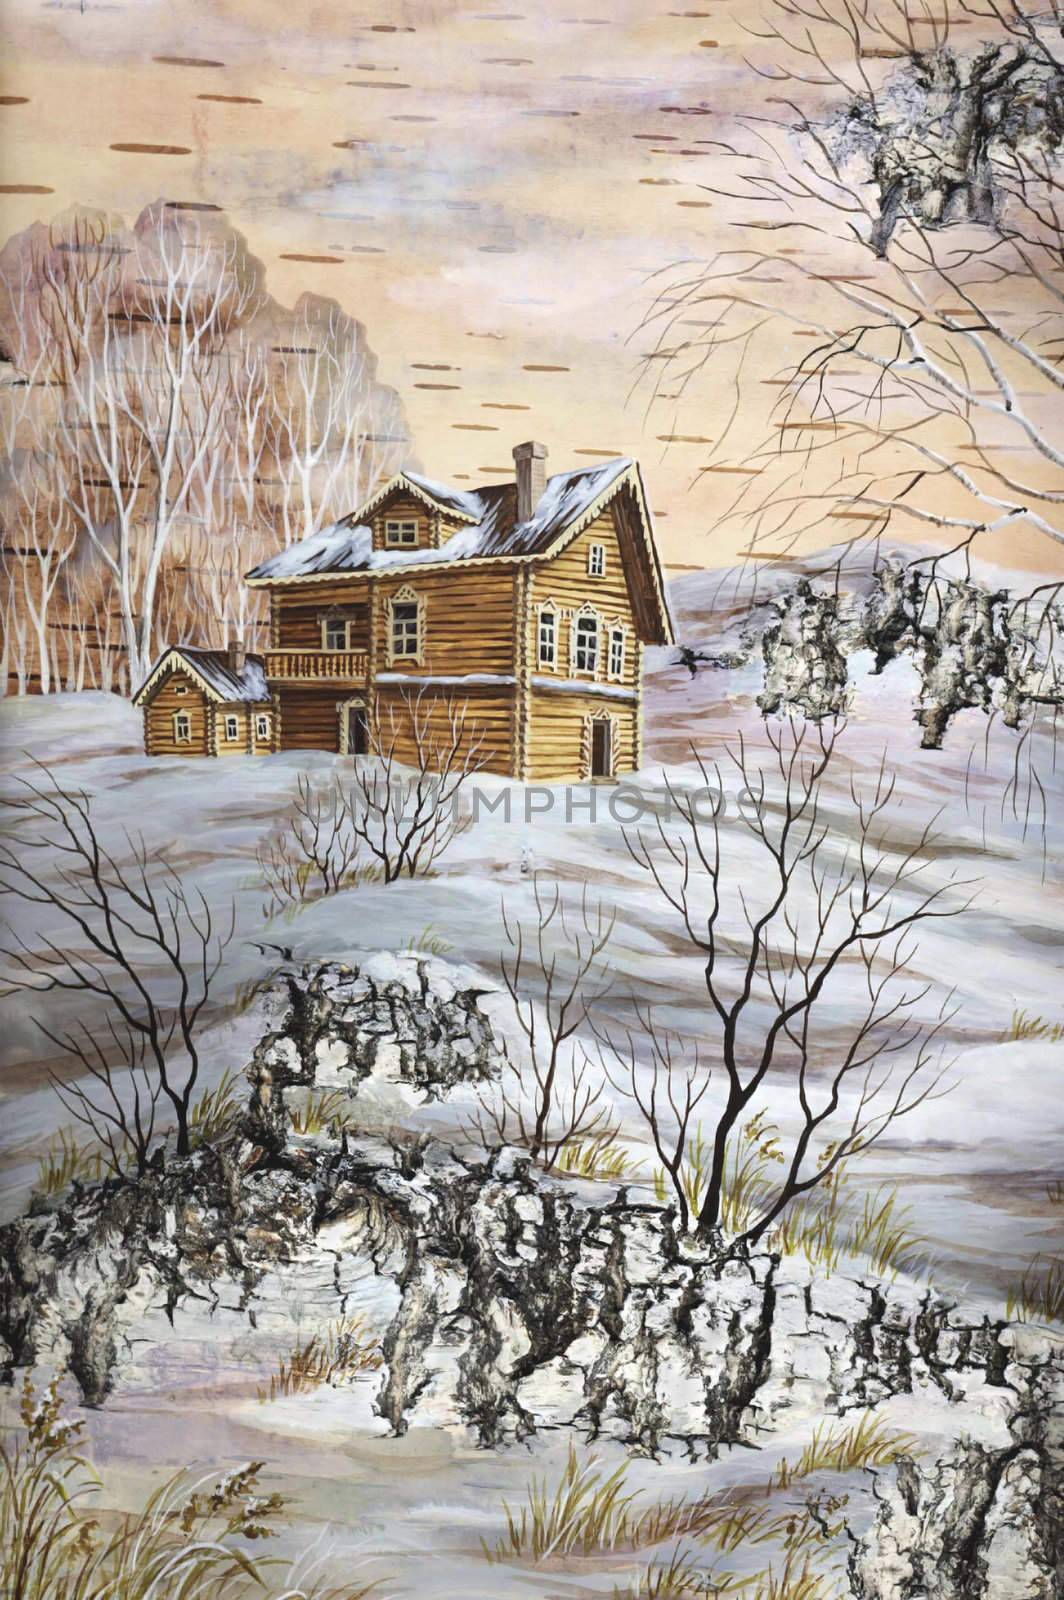 Picture, house with a wooden carving. Drawing distemper on a birch bark